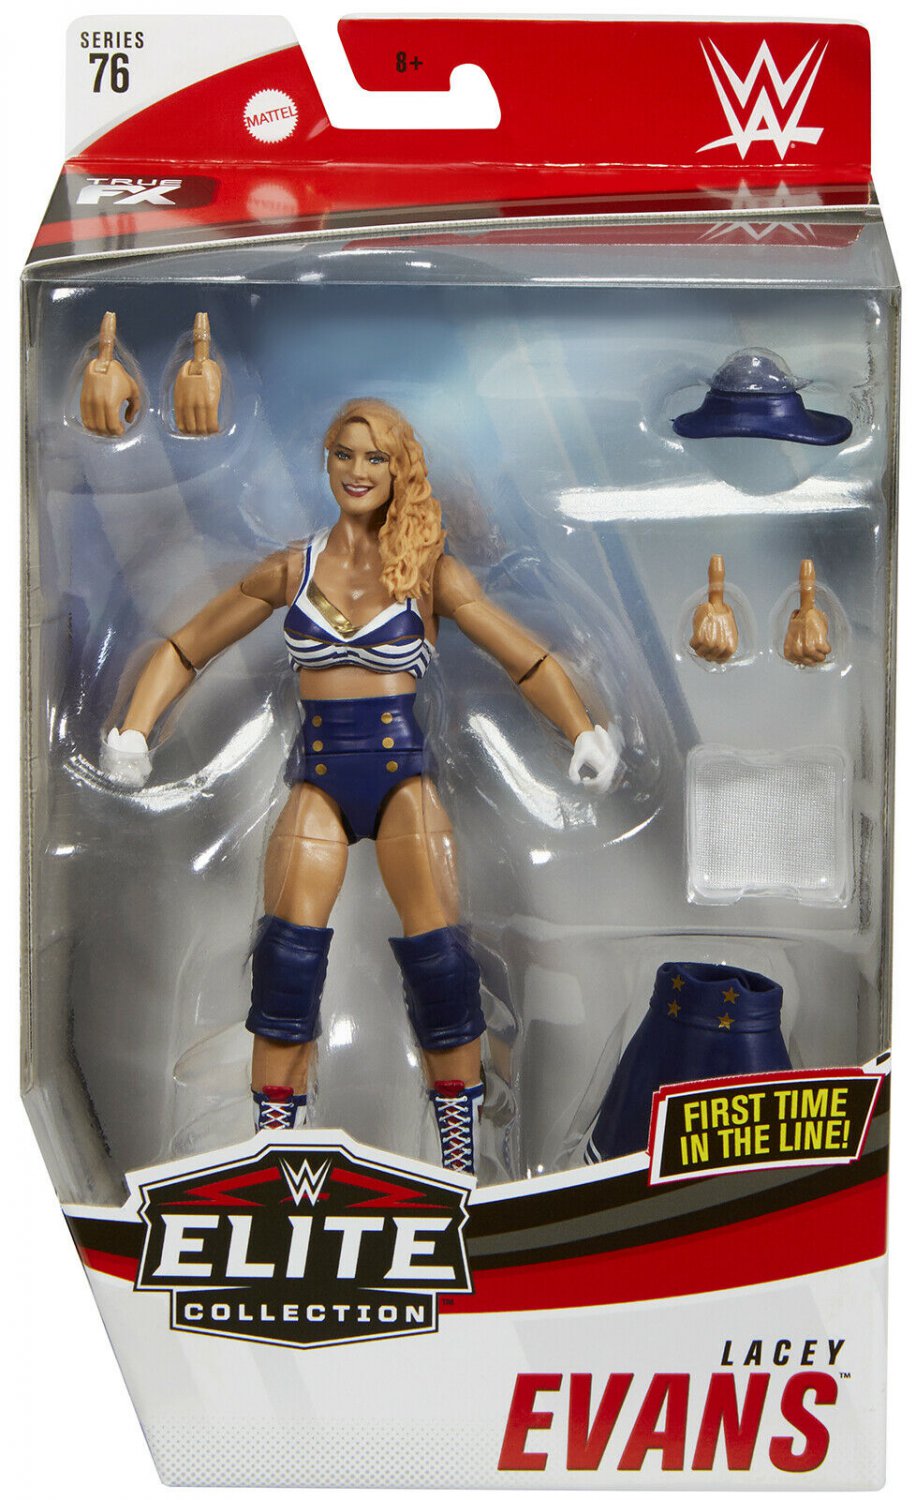 WWE LACEY EVANS ELITE COLLECTION SERIES #76 ACTION FIGURE MATTEL FIRST TIME LINE 2020 WRESTLING DIVA